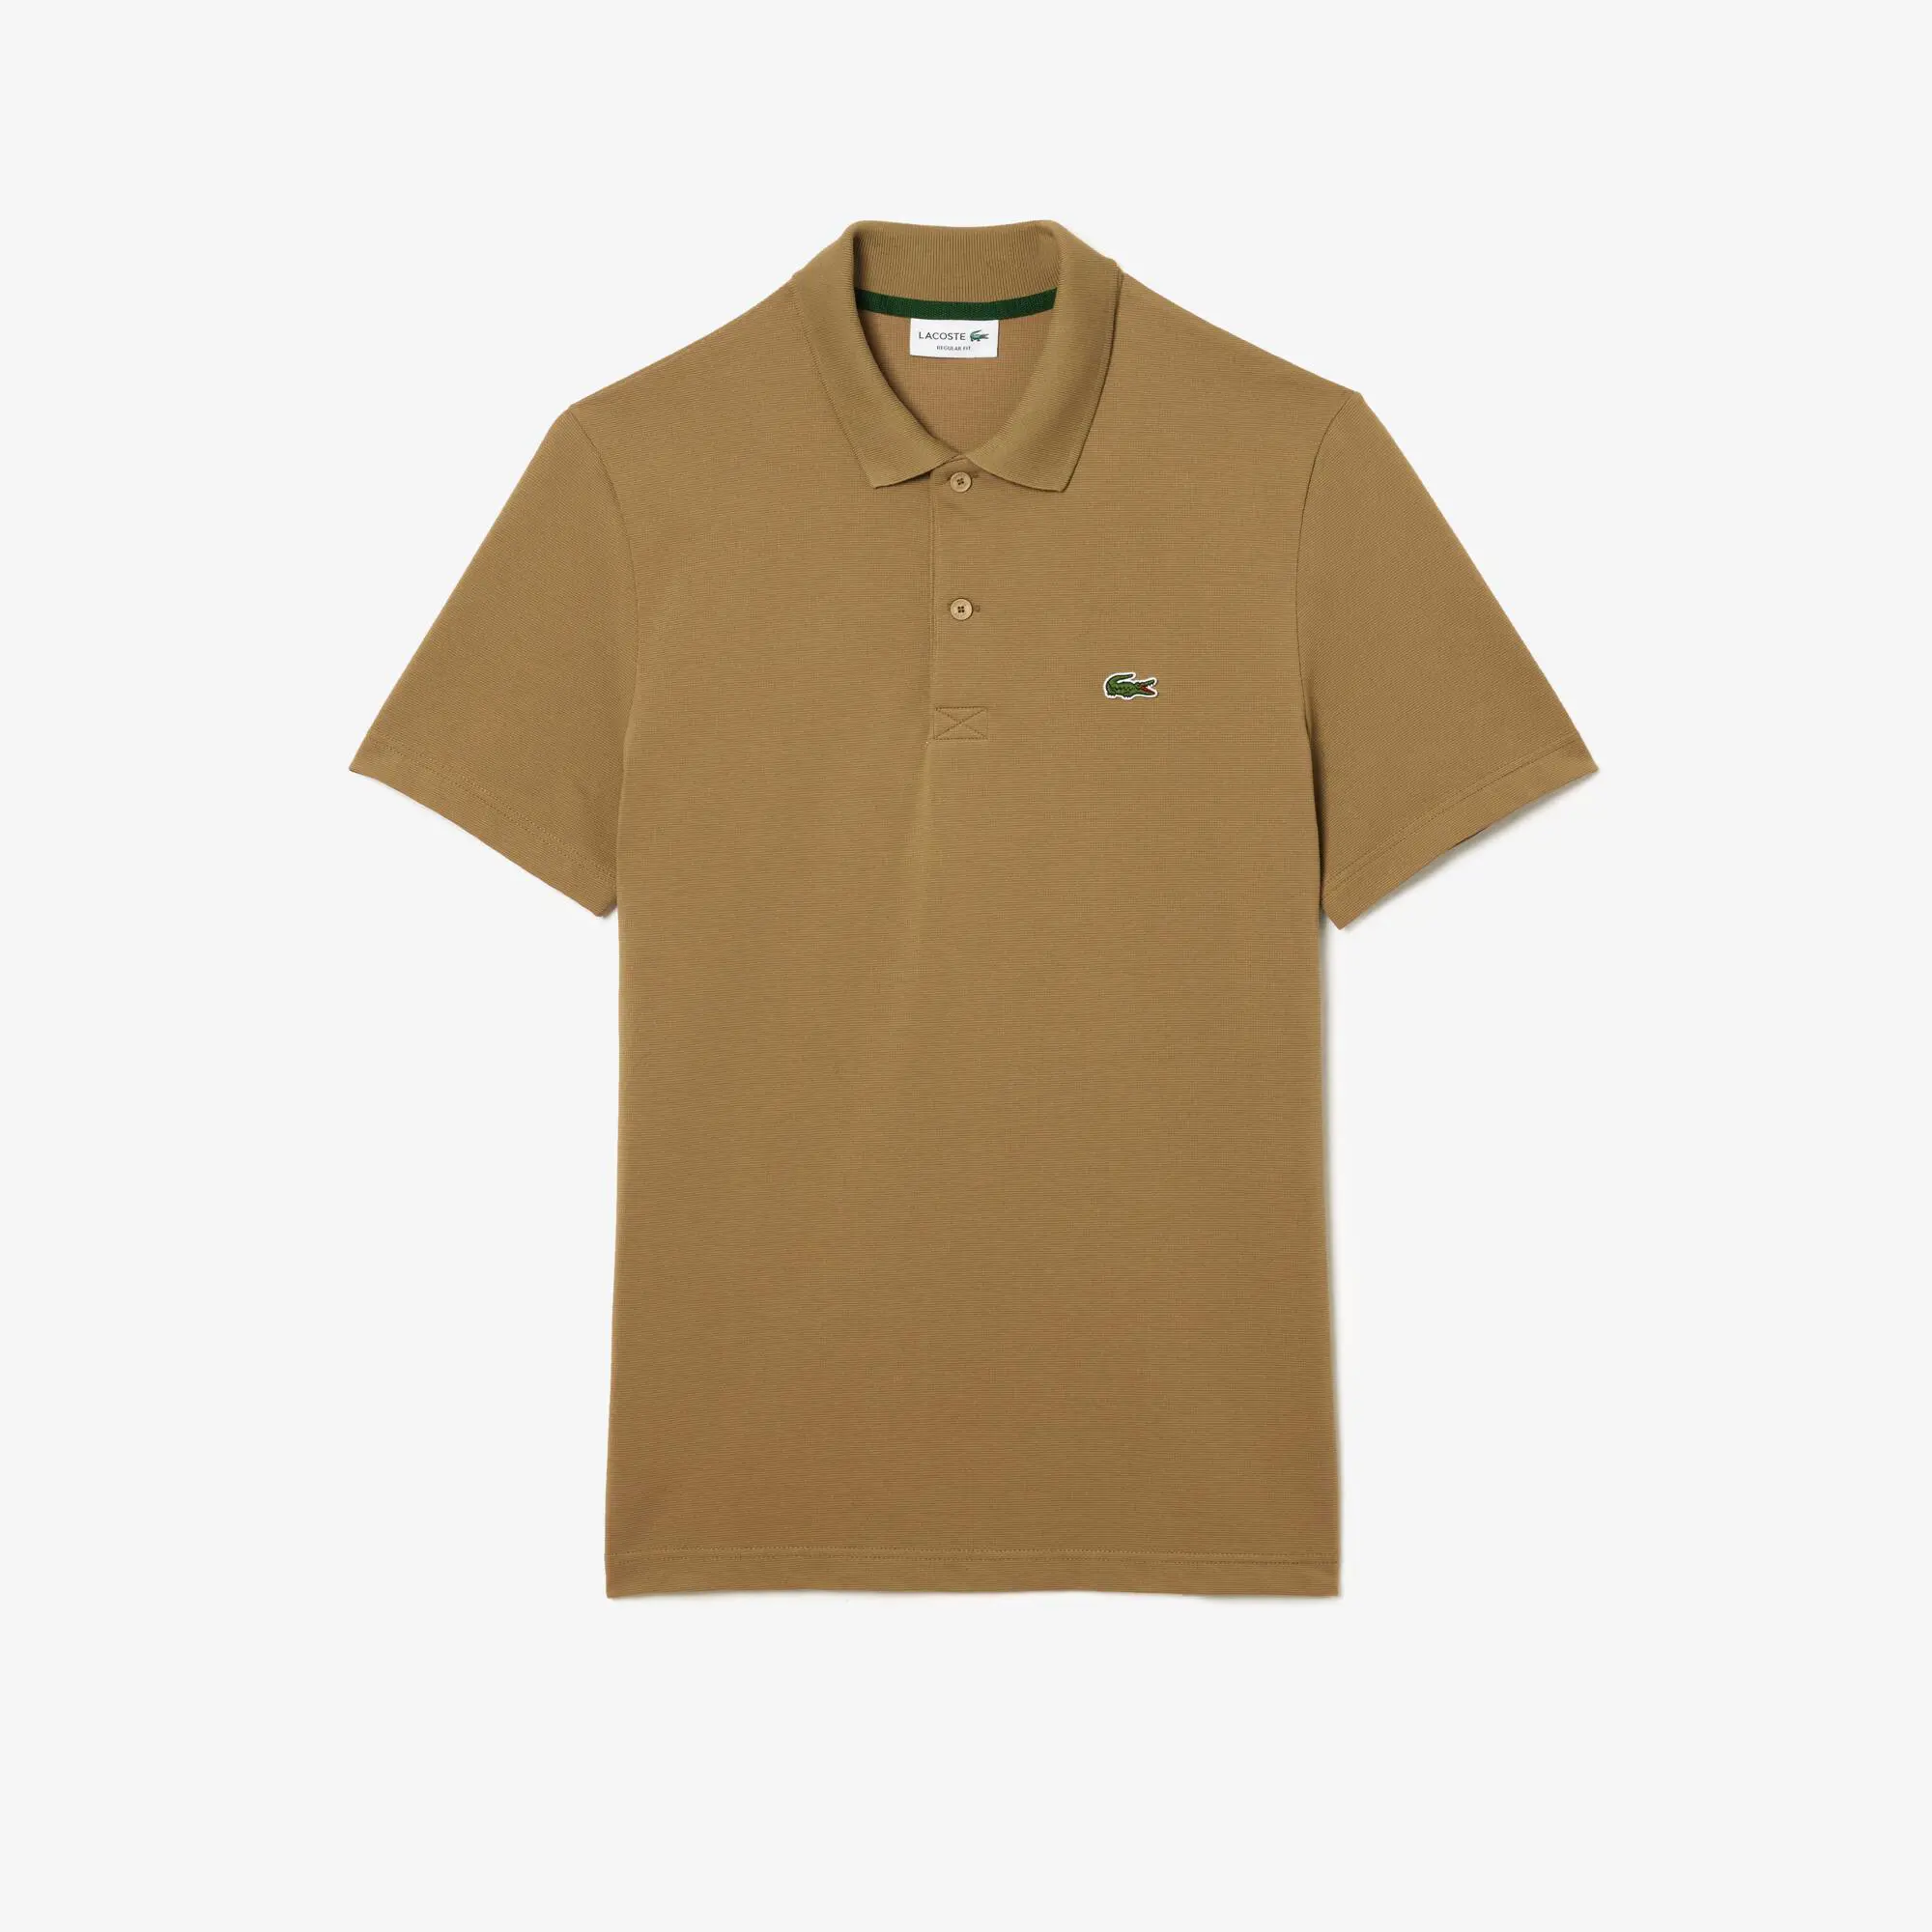 Lacoste Regular Fit Polyester Cotton Polo Shirt. 2